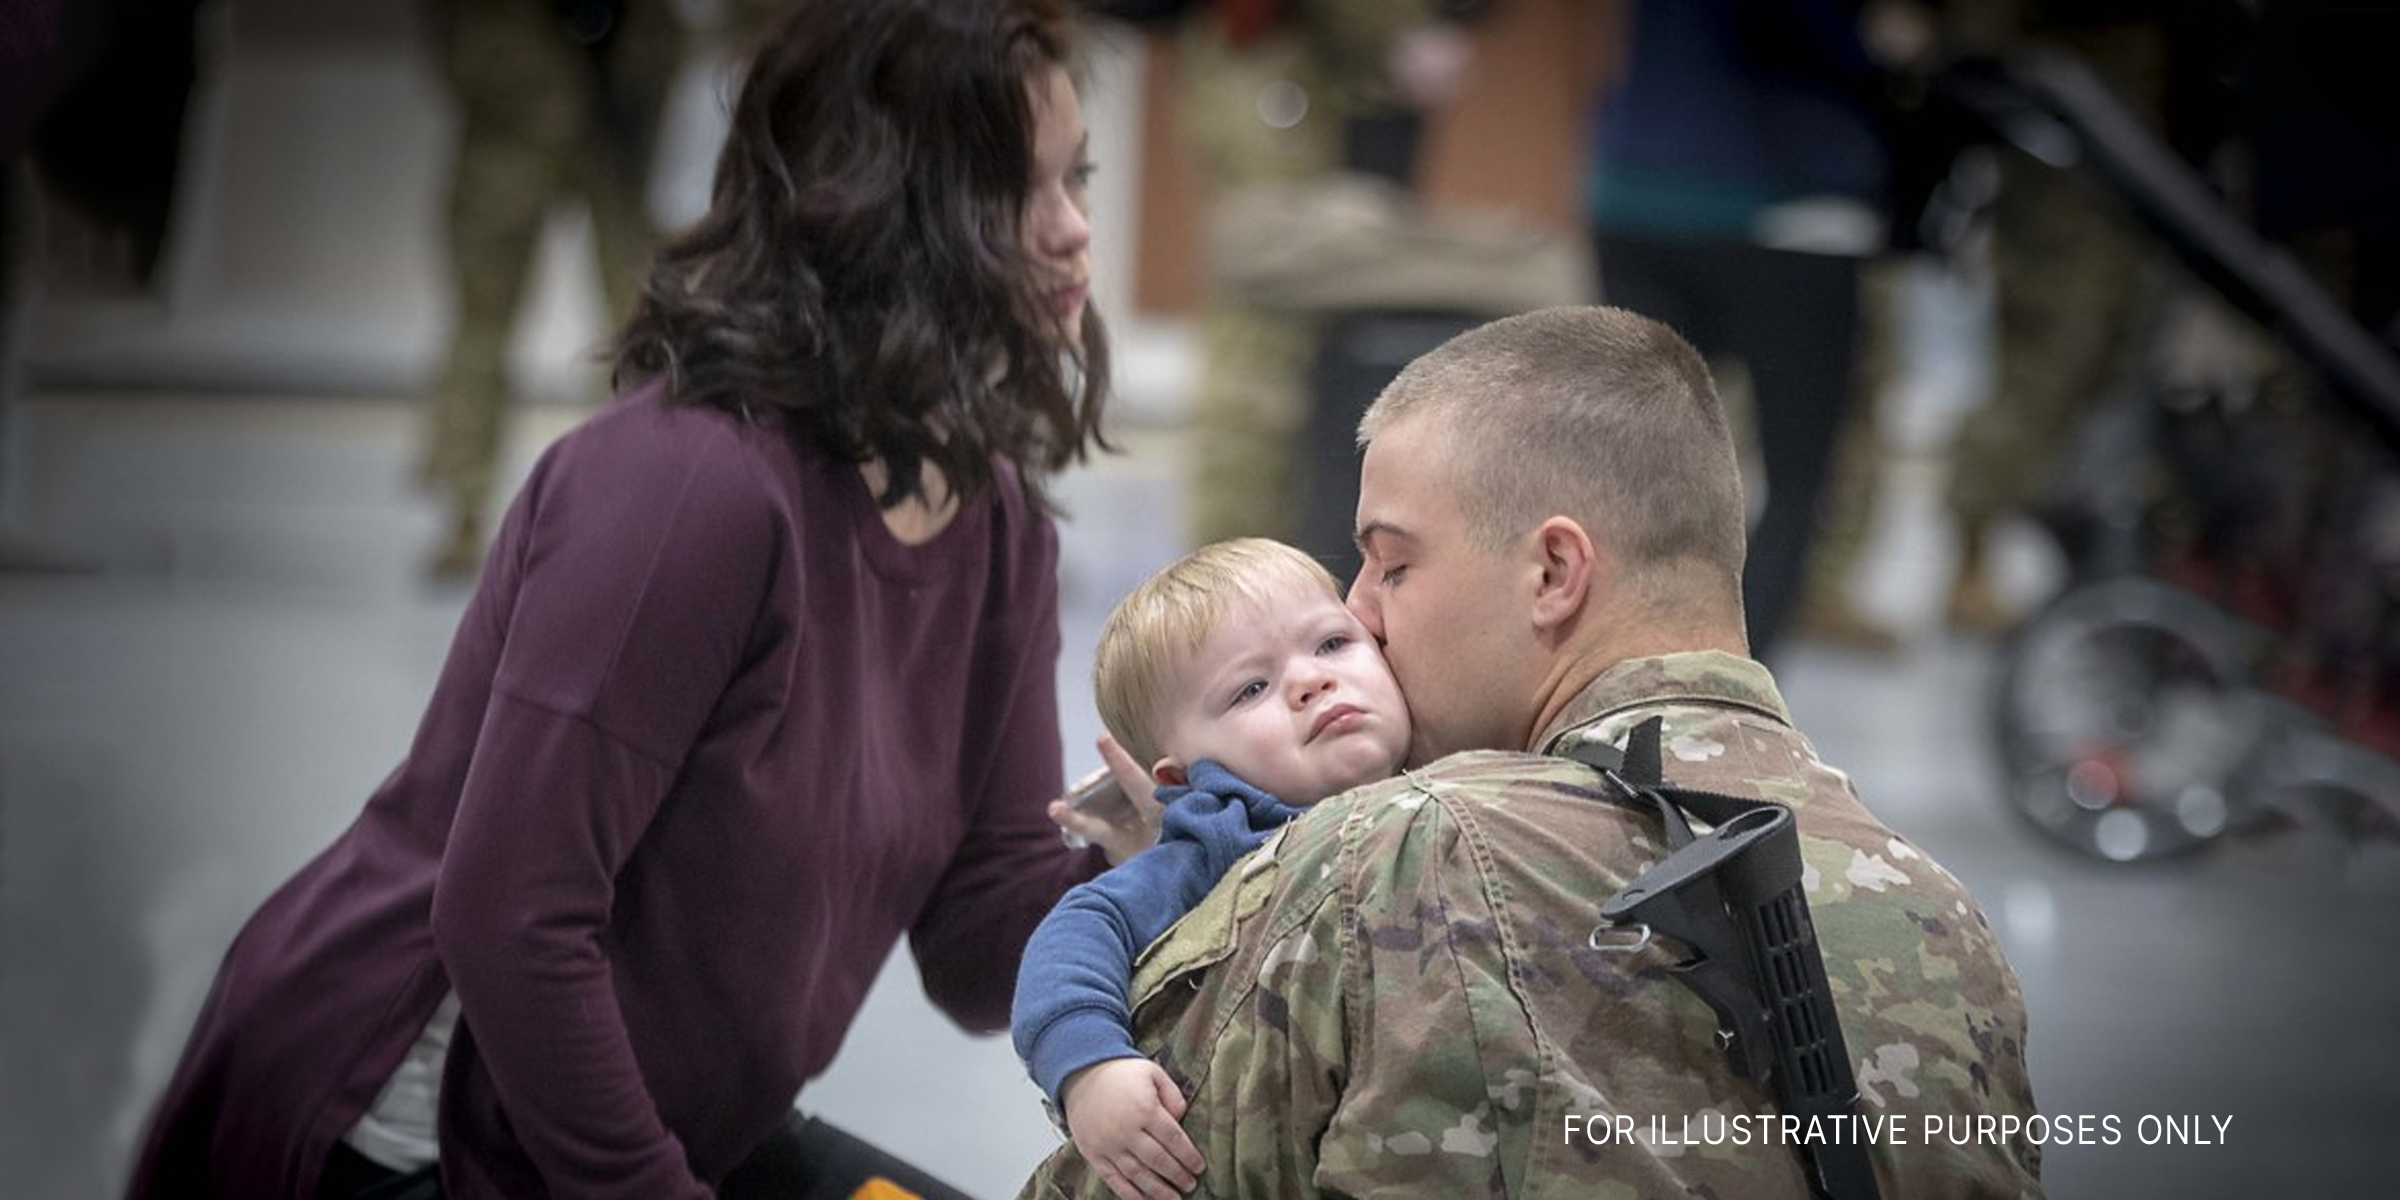 A man in the military holding his child | Source: Shutterstock